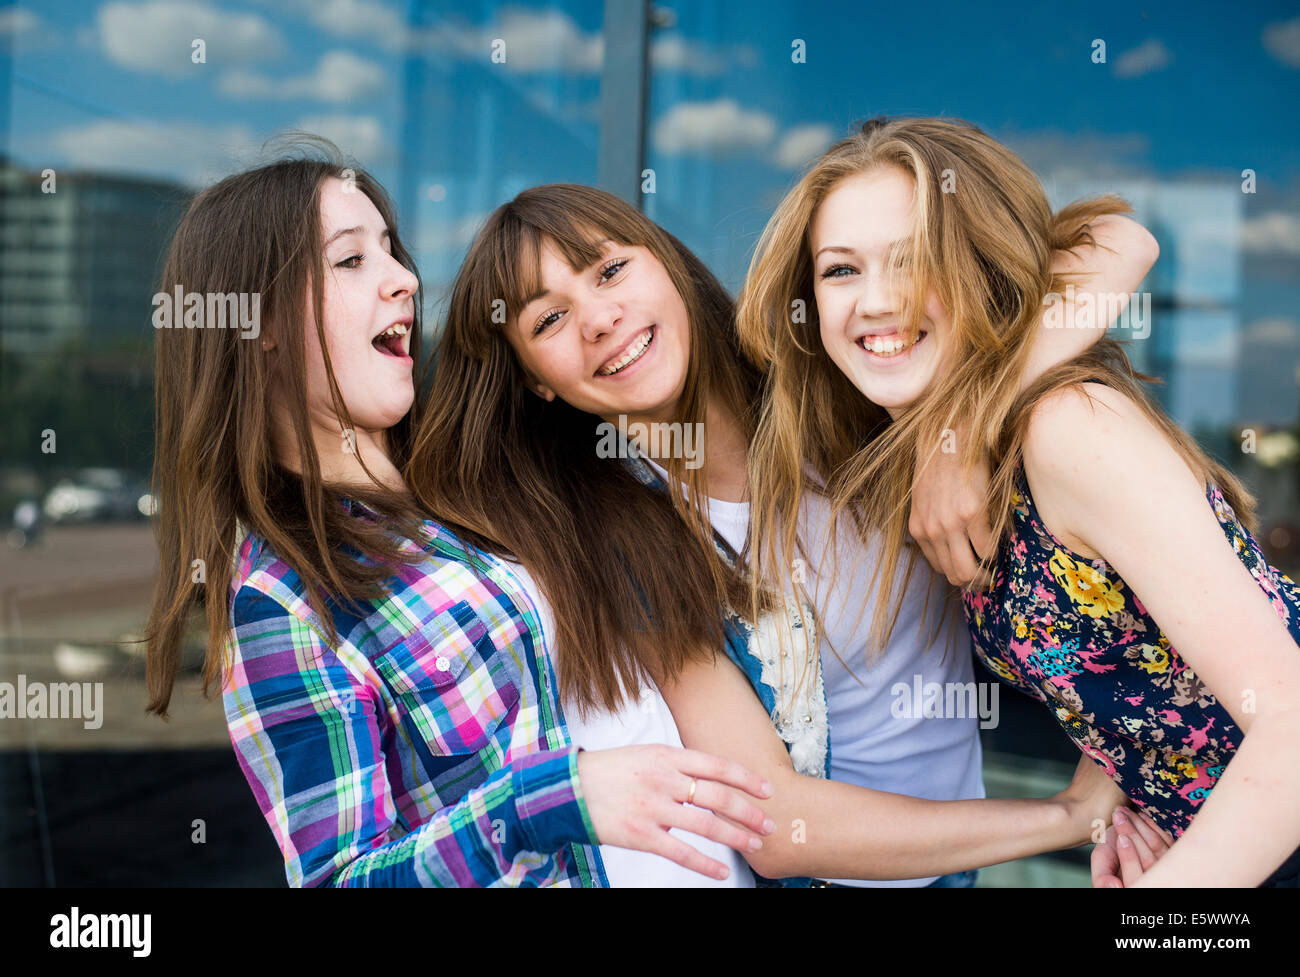 Portrait of three young women in a row Stock Photo